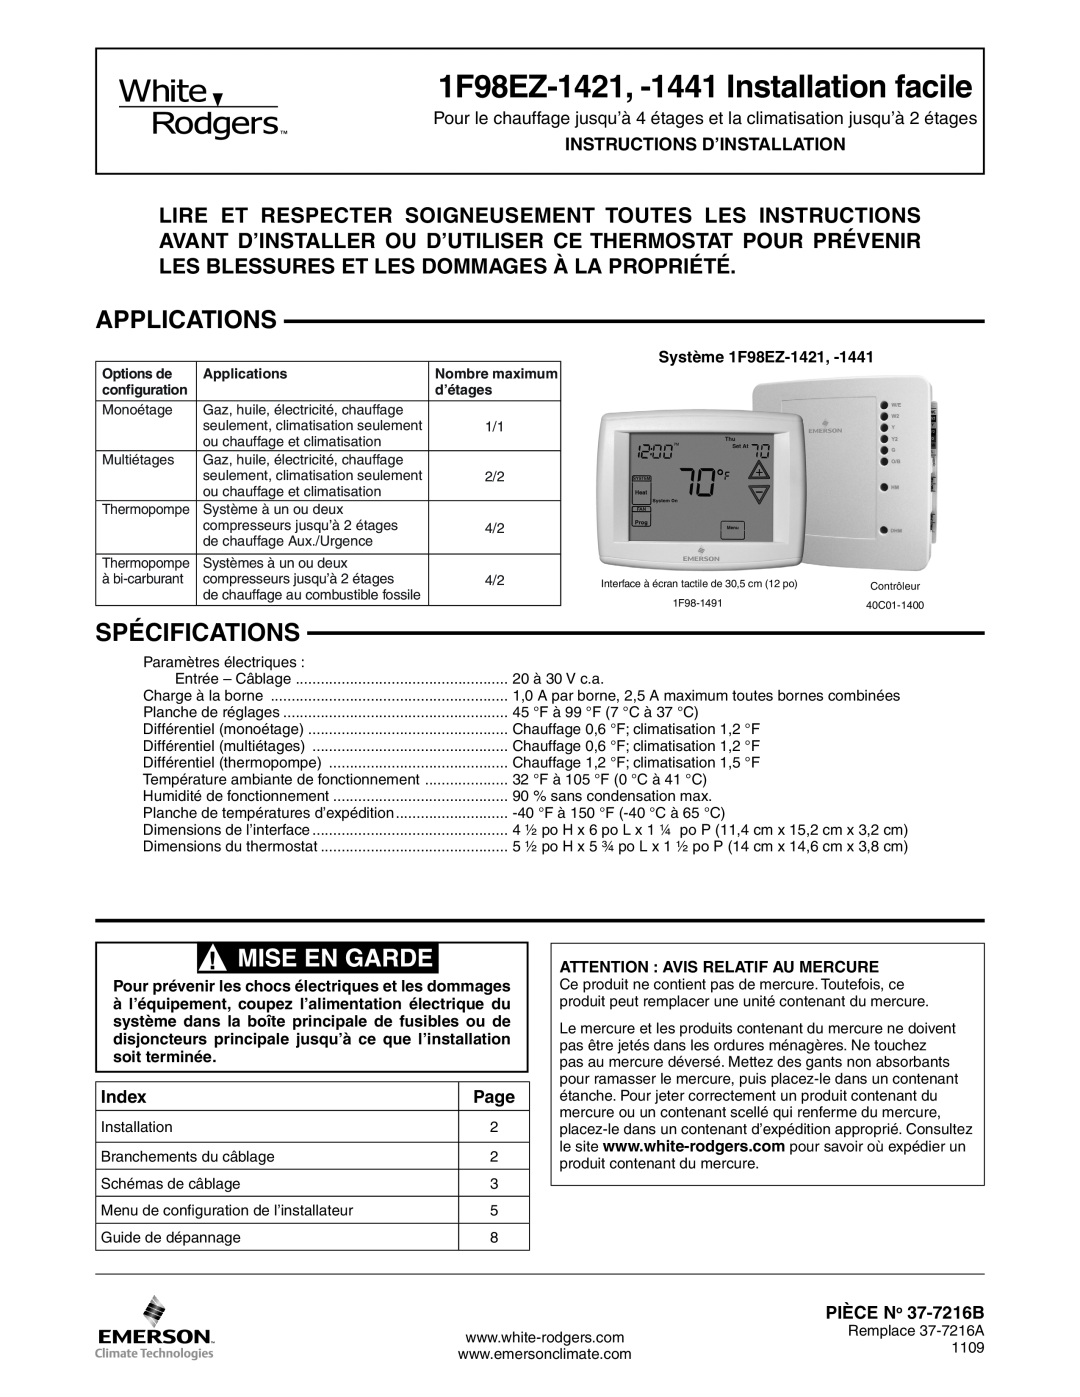 White Rodgers 1F98EZ-1441 owner manual Record Of Thermostat Options Selected, Emerson Blue, Homeowner User Guide, Factory 